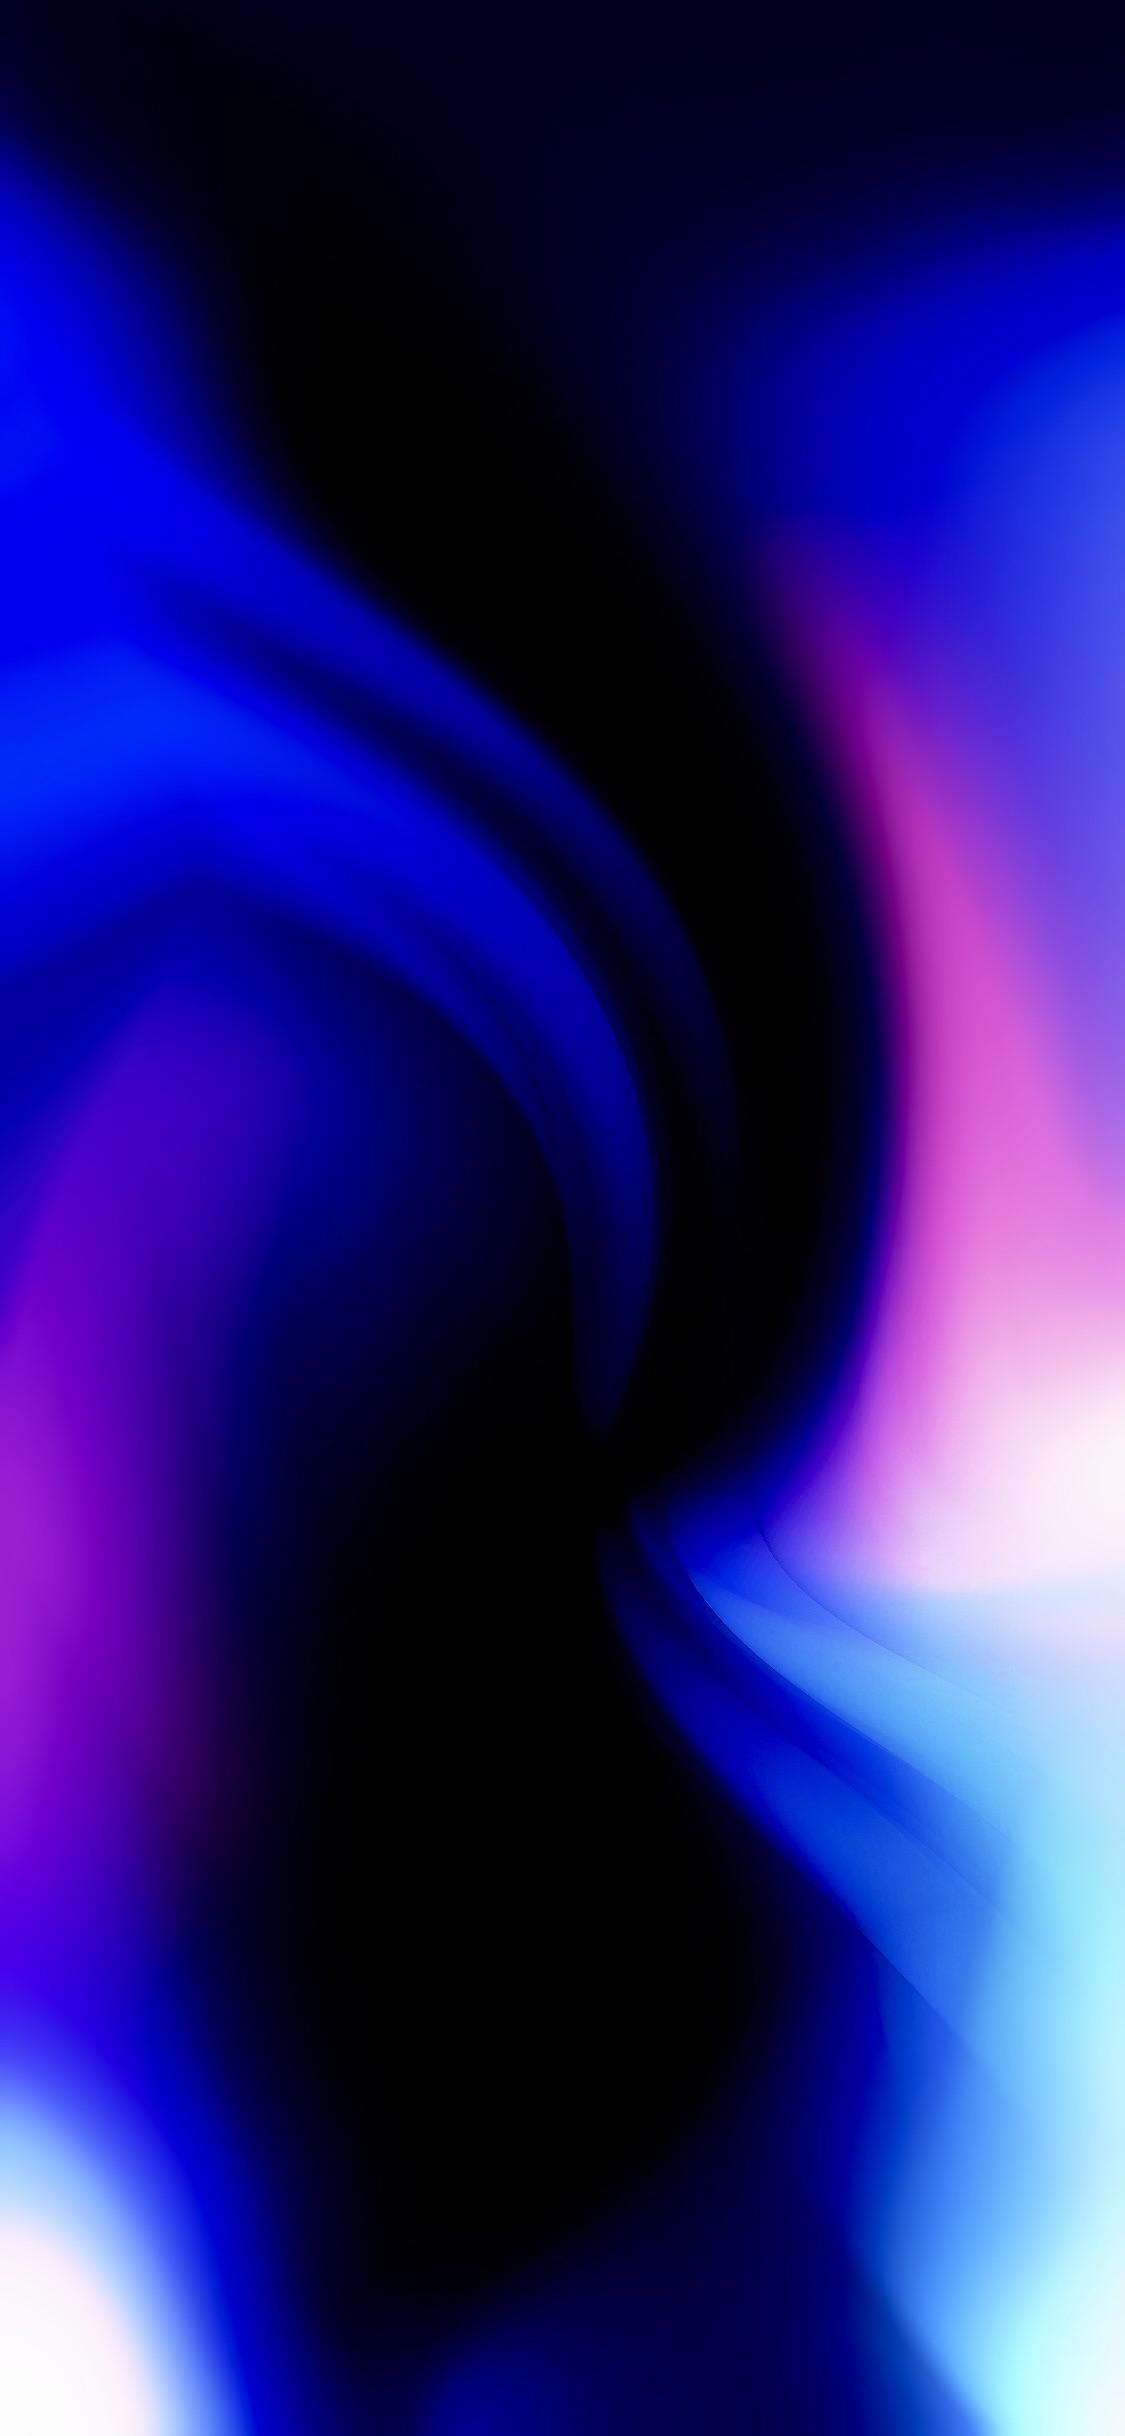 Free download iPhone X wallpaper Credits AR72014 iphone [1125x2436] for your Desktop, Mobile & Tablet. Explore iPhone X Multicolor Wallpaper. iPhone X Multicolor Wallpaper, IPhone X Wallpaper, IPhone X Wallpaper